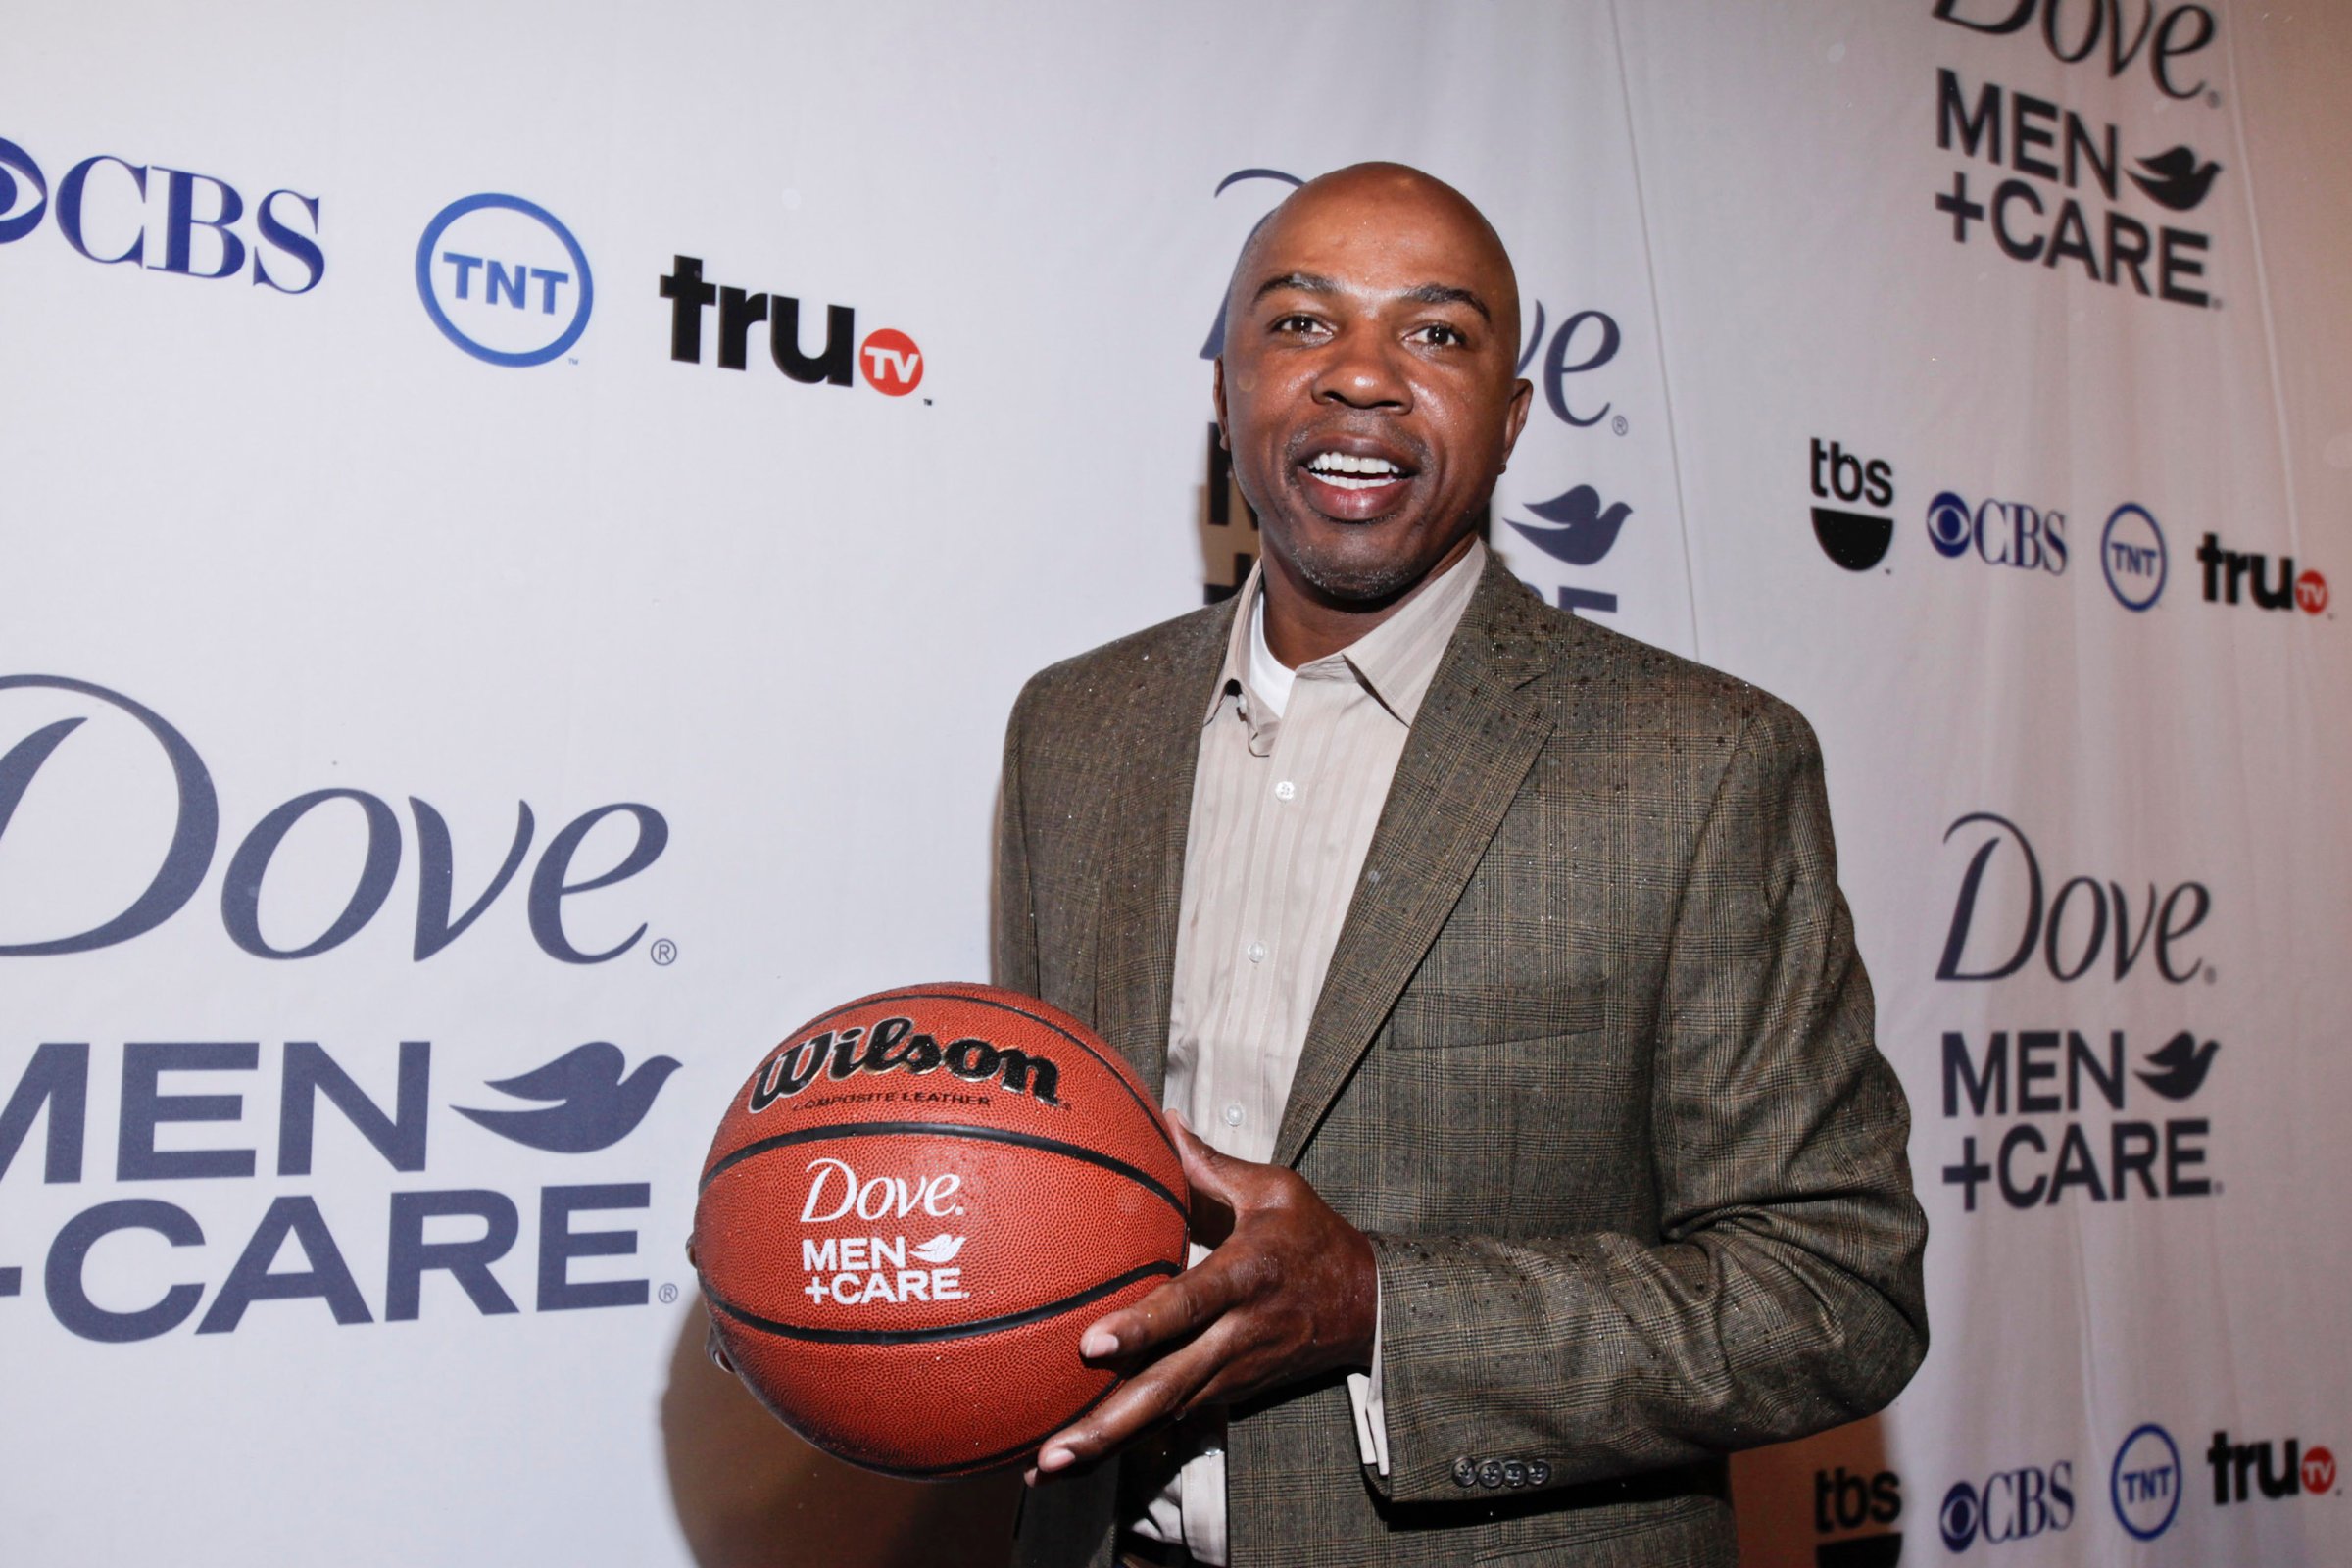 NBA TV & CBS College Basketball Analyst Greg Anthony joins DOVE Men+Care and Shaquille O'Neal in bringing his "Journey to Comfort" to NCAA Final Four Weekend by caring for the Boys and Girls Club of Southeast Louisiana at House of Blues on March 30, 2012 in New Orleans.